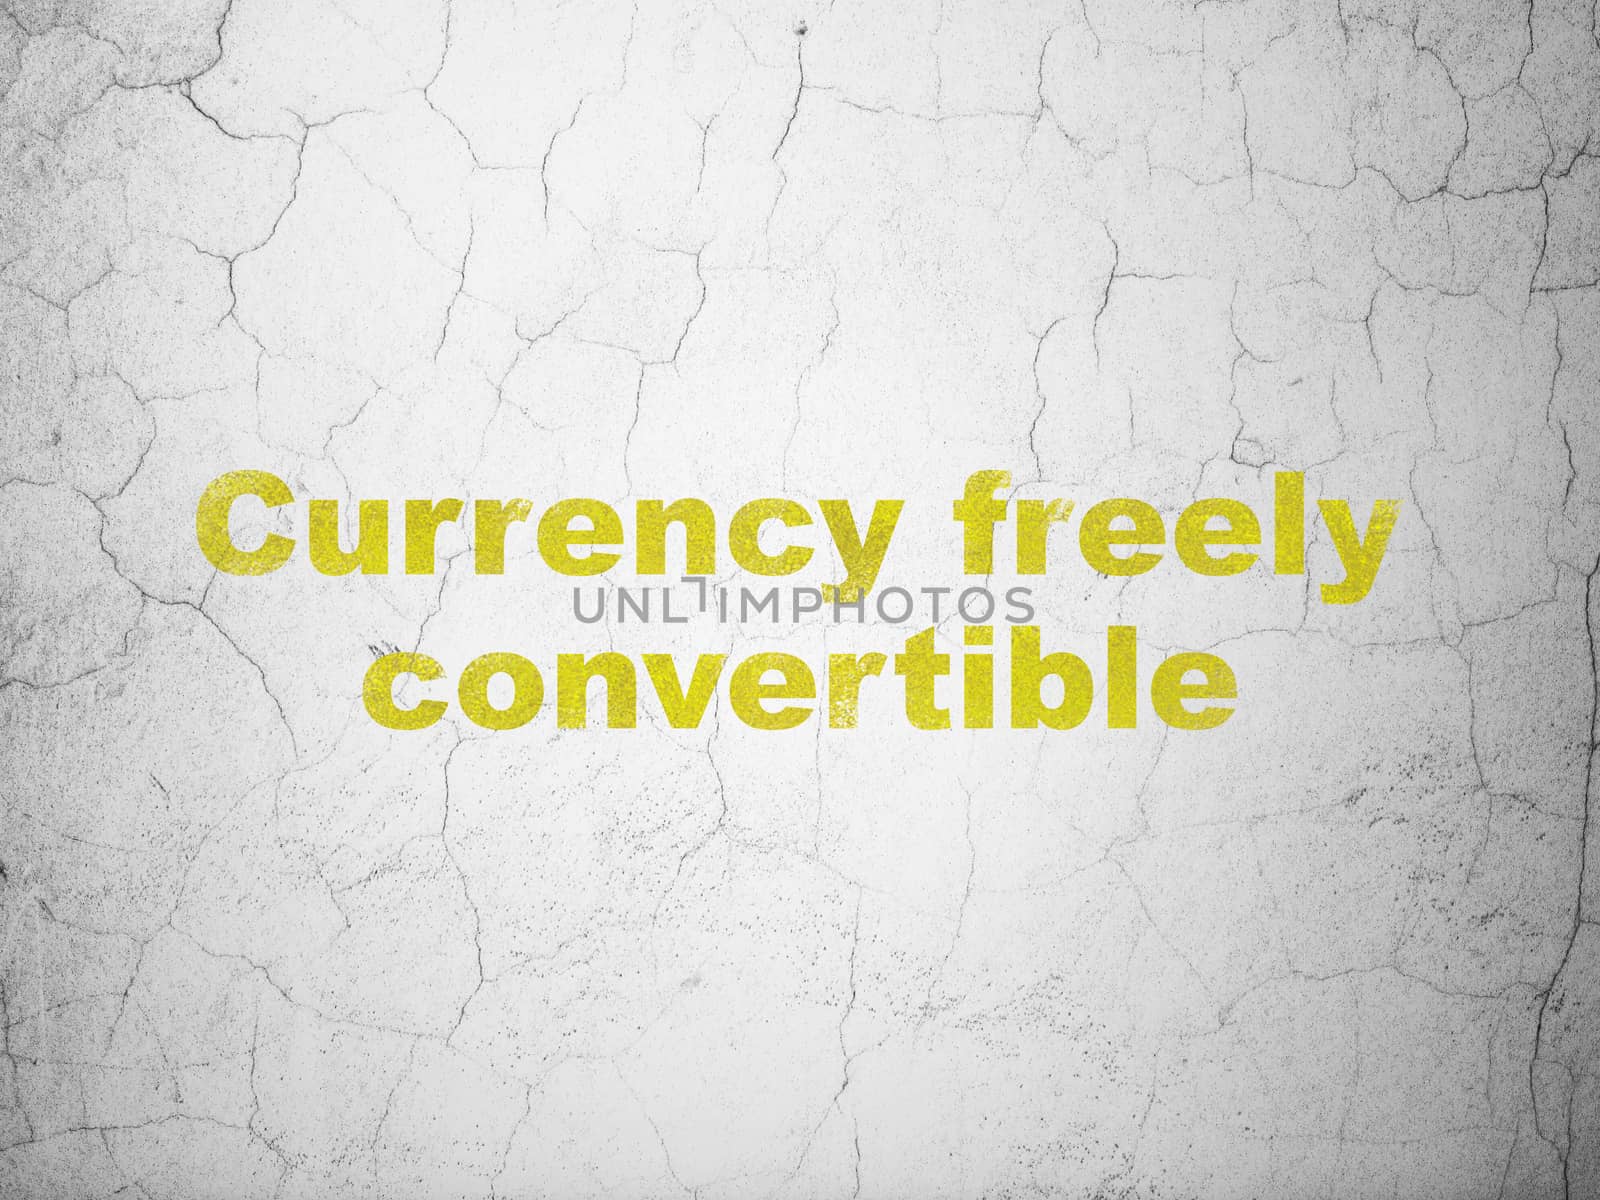 Money concept: Currency freely Convertible on wall background by maxkabakov